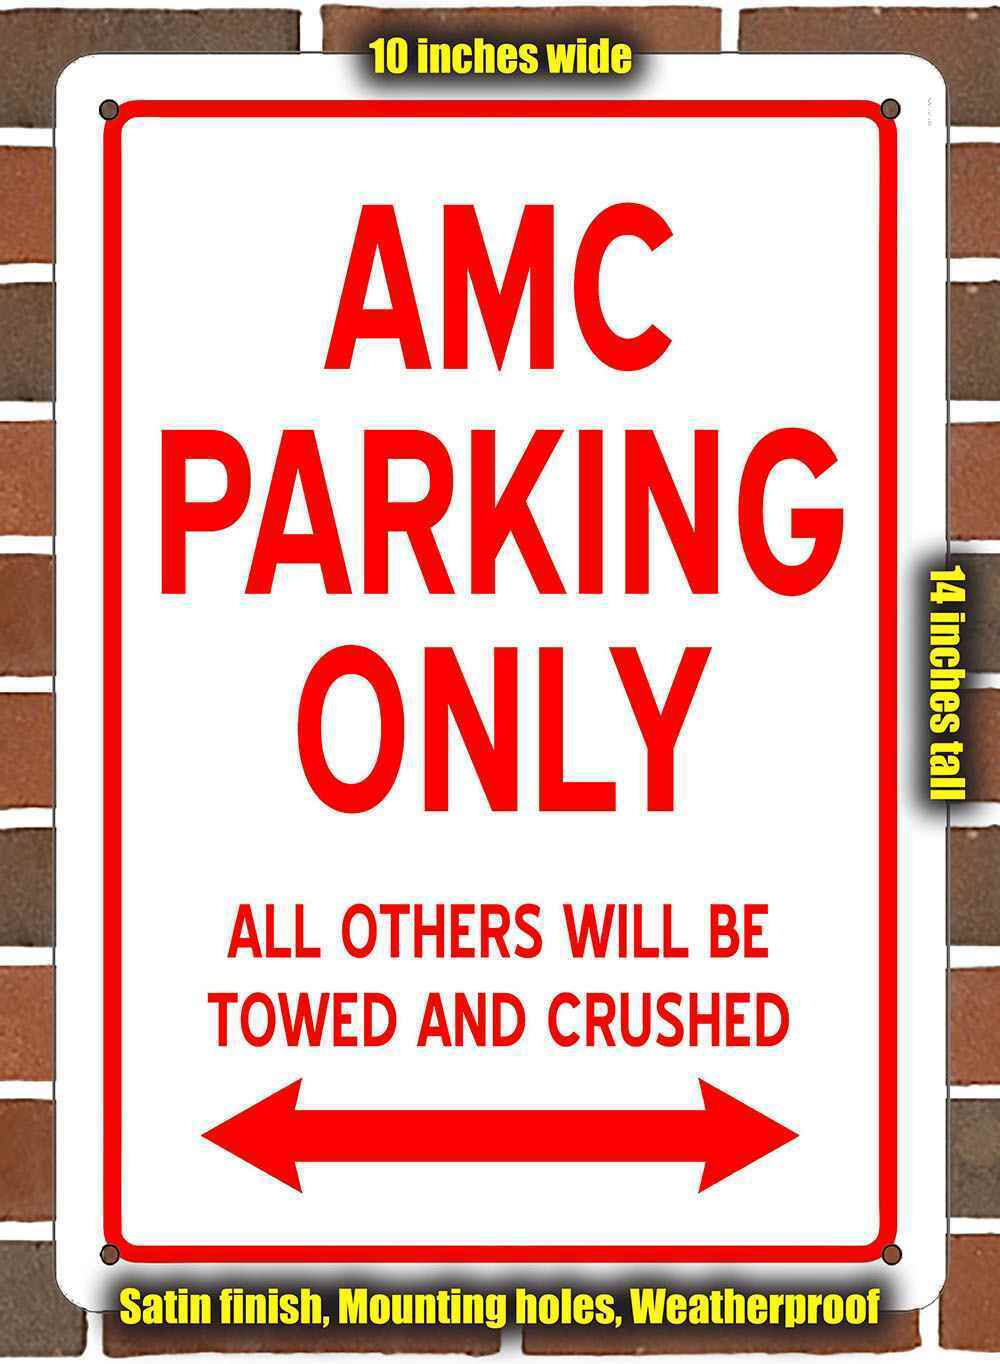 Metal Sign - AMC PARKING ONLY- 10x14 inches